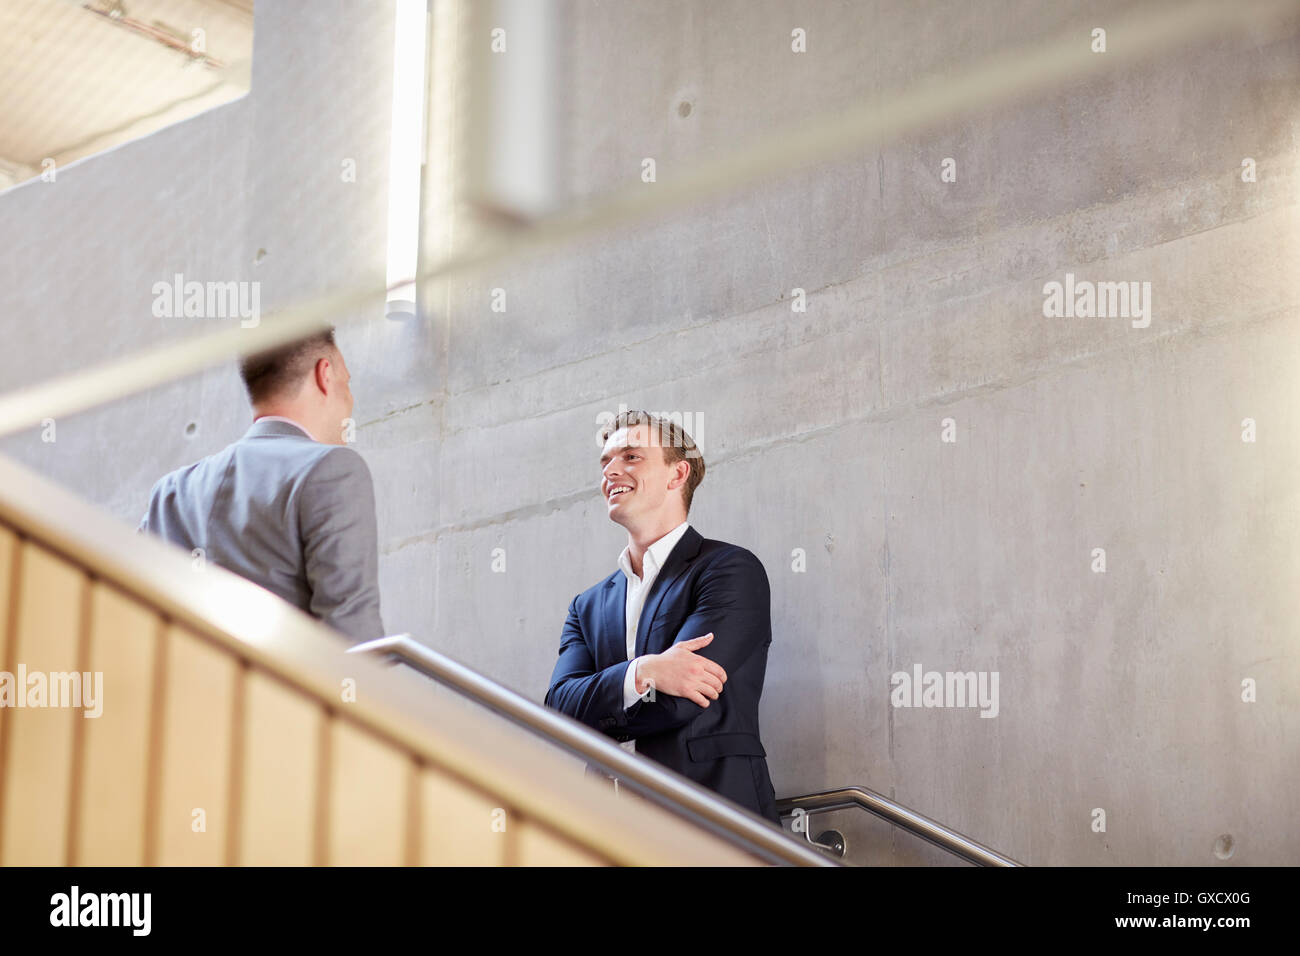 Two businessmen talking on office stairway Stock Photo